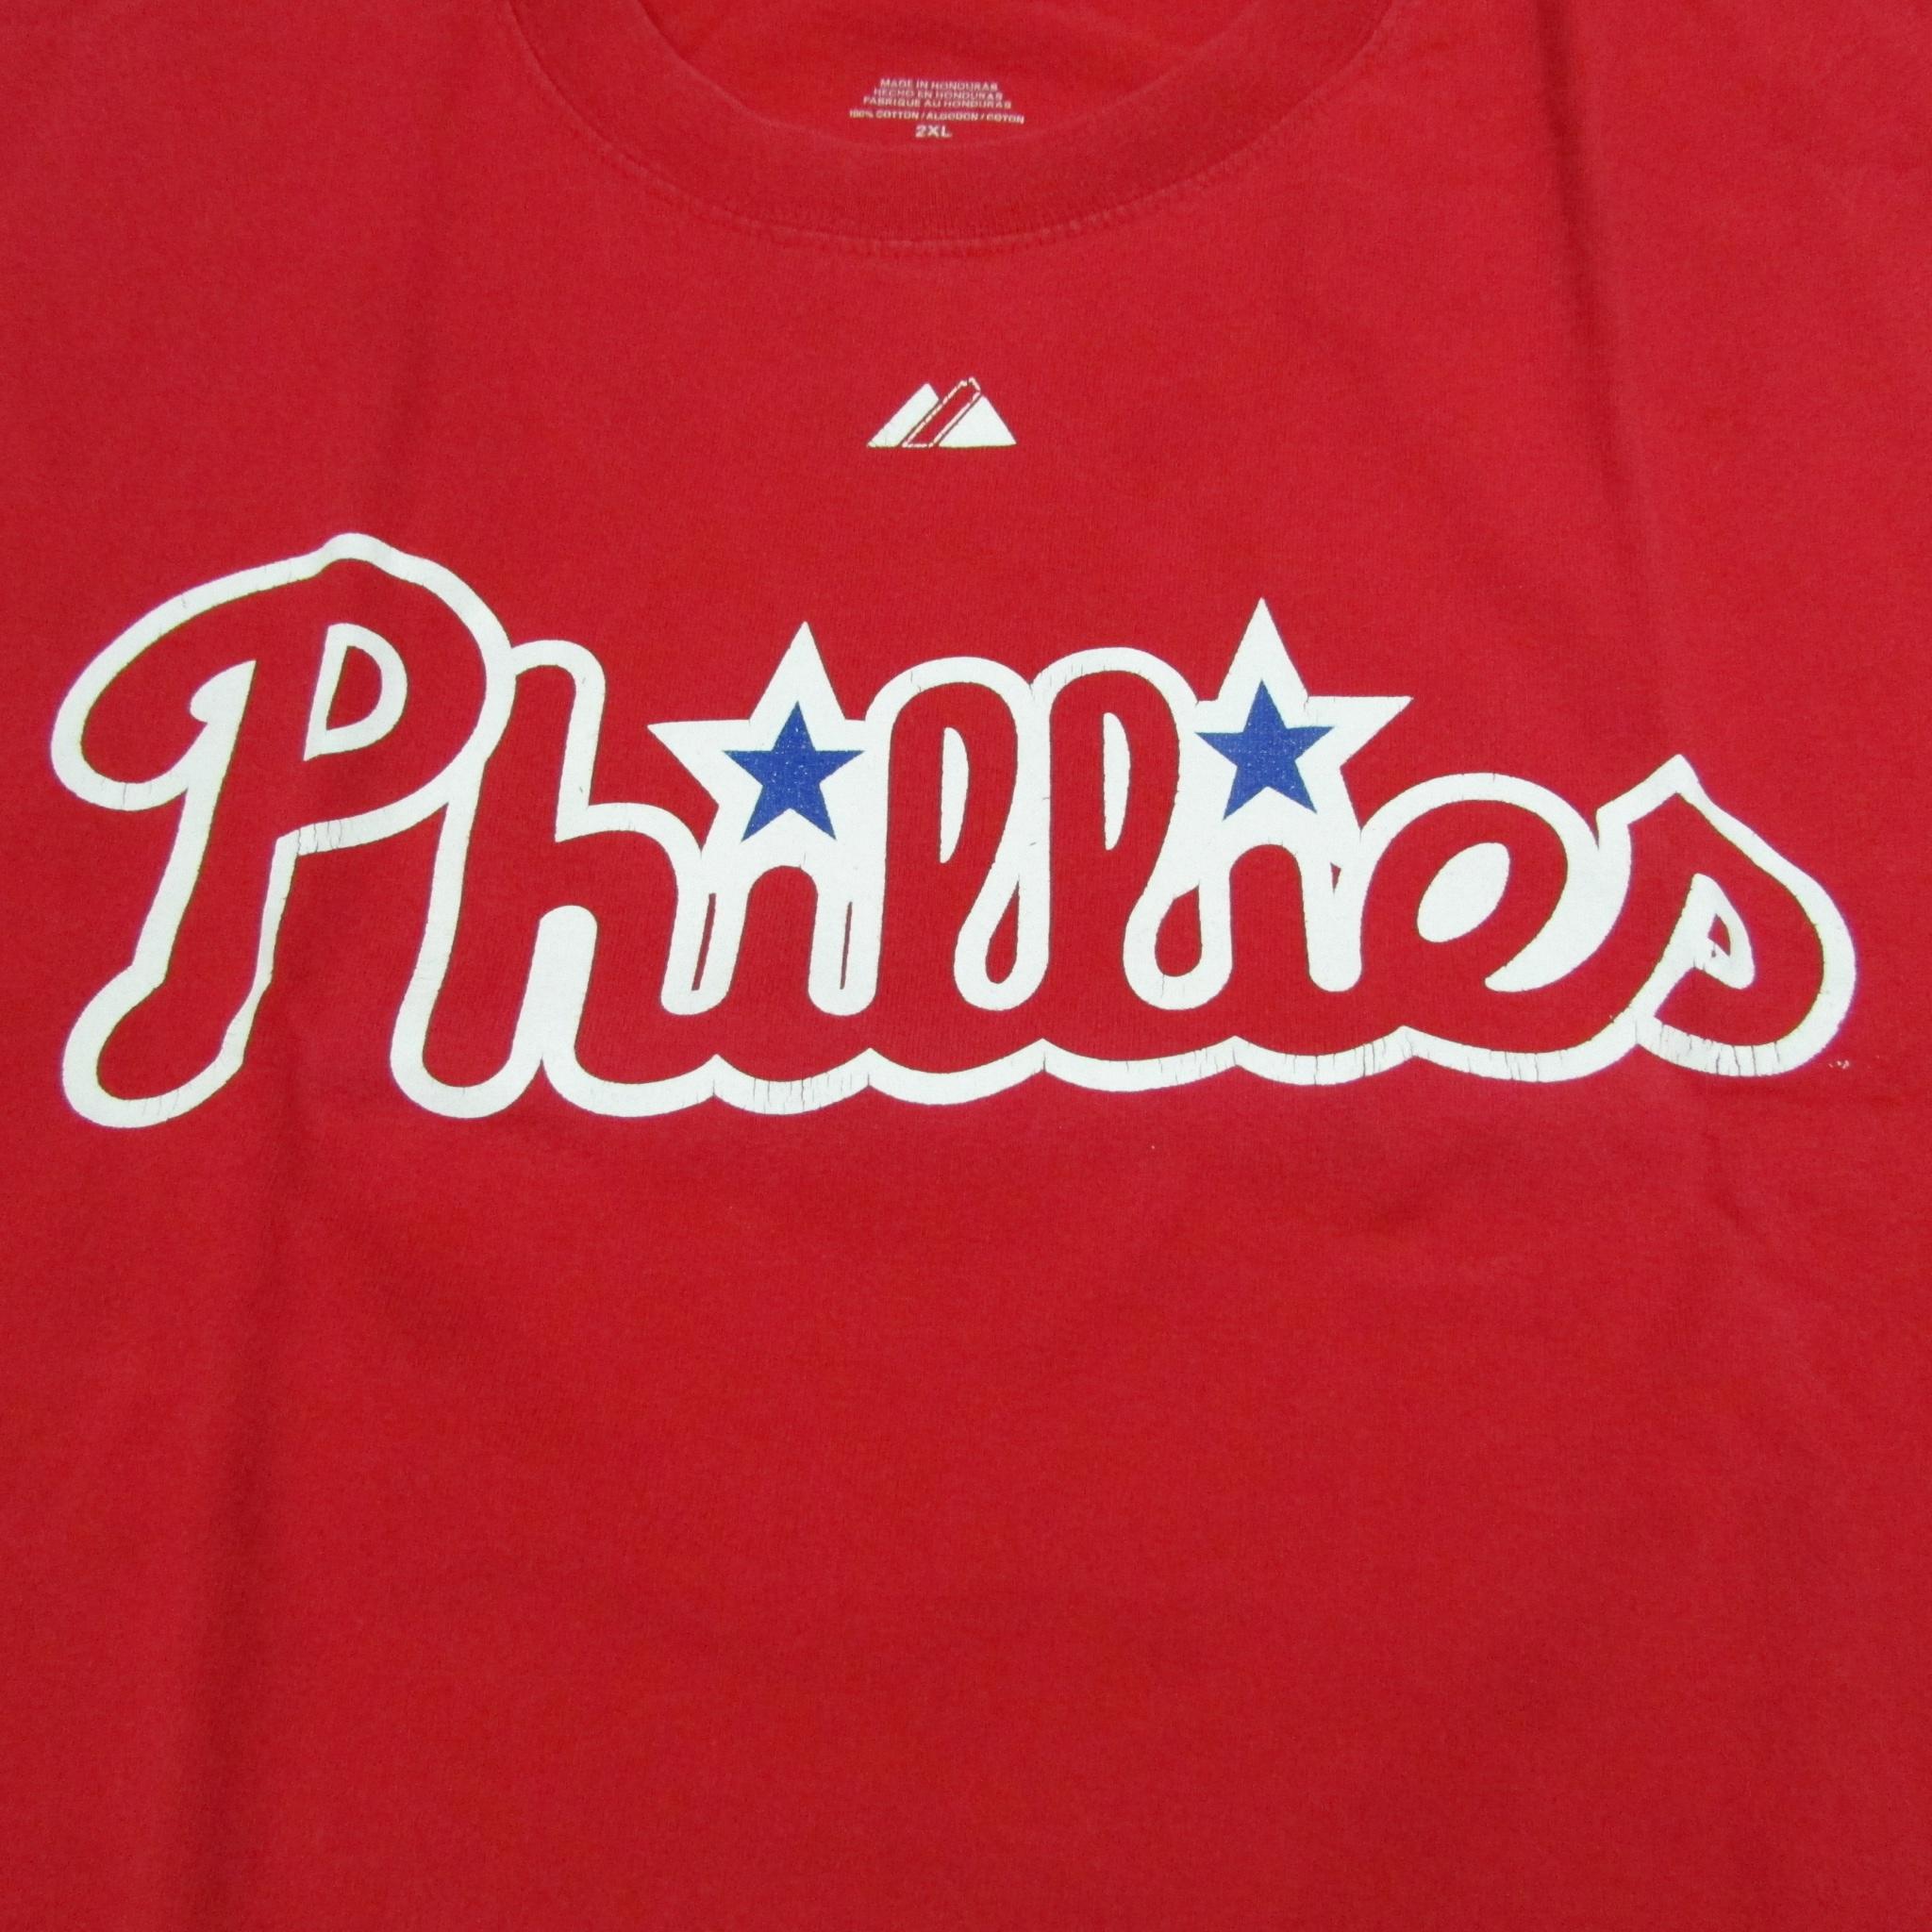 chase utley phillies shirt